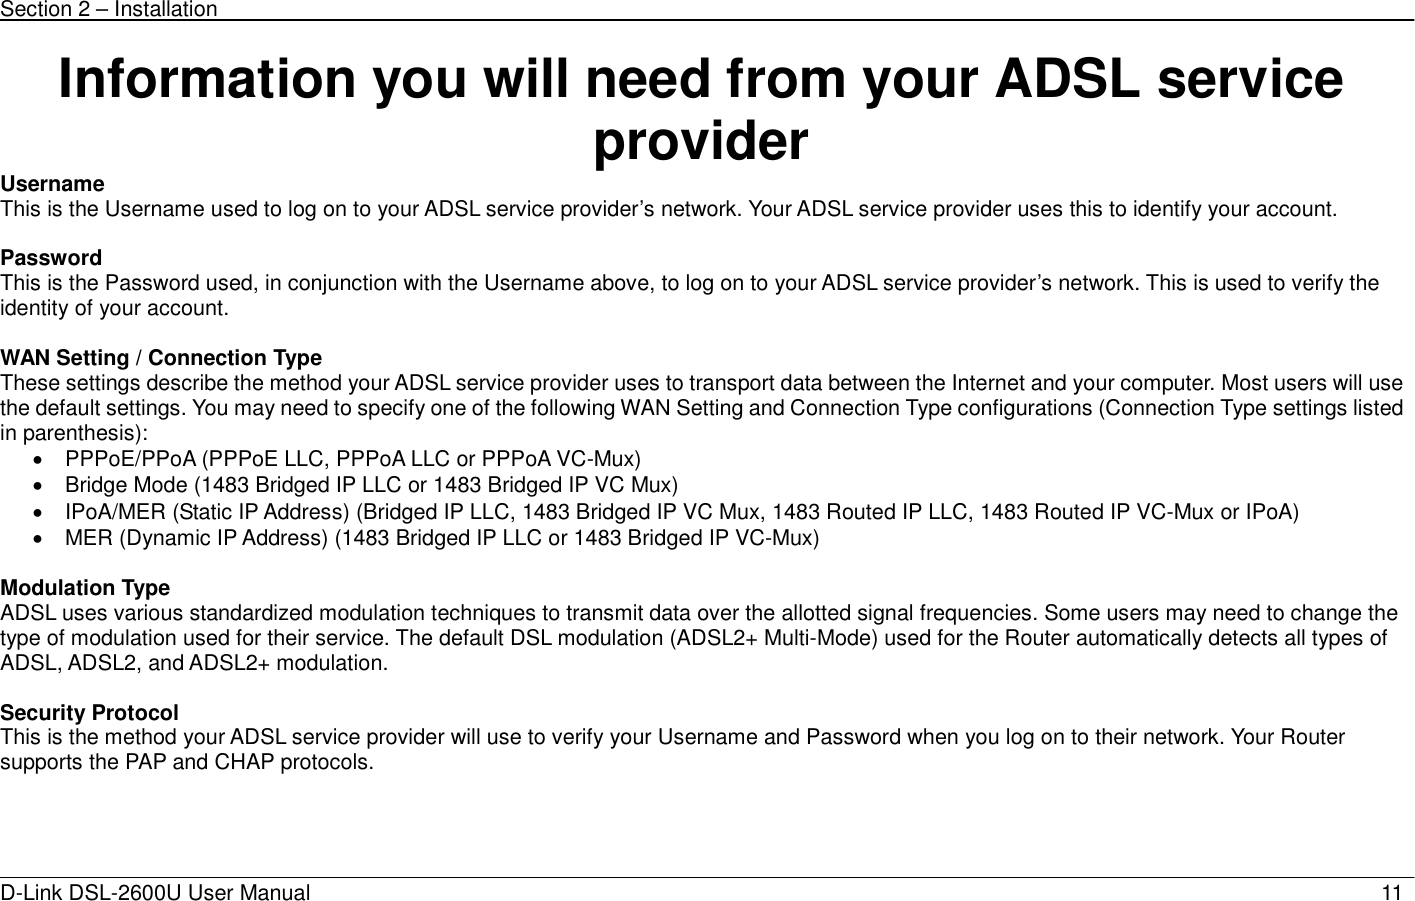 Section 2 – Installation   D-Link DSL-2600U User Manual                            11Information you will need from your ADSL service provider Username This is the Username used to log on to your ADSL service provider’s network. Your ADSL service provider uses this to identify your account.  Password This is the Password used, in conjunction with the Username above, to log on to your ADSL service provider’s network. This is used to verify the identity of your account.  WAN Setting / Connection Type These settings describe the method your ADSL service provider uses to transport data between the Internet and your computer. Most users will use the default settings. You may need to specify one of the following WAN Setting and Connection Type configurations (Connection Type settings listed in parenthesis):   •  PPPoE/PPoA (PPPoE LLC, PPPoA LLC or PPPoA VC-Mux) •  Bridge Mode (1483 Bridged IP LLC or 1483 Bridged IP VC Mux) •  IPoA/MER (Static IP Address) (Bridged IP LLC, 1483 Bridged IP VC Mux, 1483 Routed IP LLC, 1483 Routed IP VC-Mux or IPoA) •  MER (Dynamic IP Address) (1483 Bridged IP LLC or 1483 Bridged IP VC-Mux)      Modulation Type ADSL uses various standardized modulation techniques to transmit data over the allotted signal frequencies. Some users may need to change the type of modulation used for their service. The default DSL modulation (ADSL2+ Multi-Mode) used for the Router automatically detects all types of ADSL, ADSL2, and ADSL2+ modulation.    Security Protocol This is the method your ADSL service provider will use to verify your Username and Password when you log on to their network. Your Router supports the PAP and CHAP protocols.     